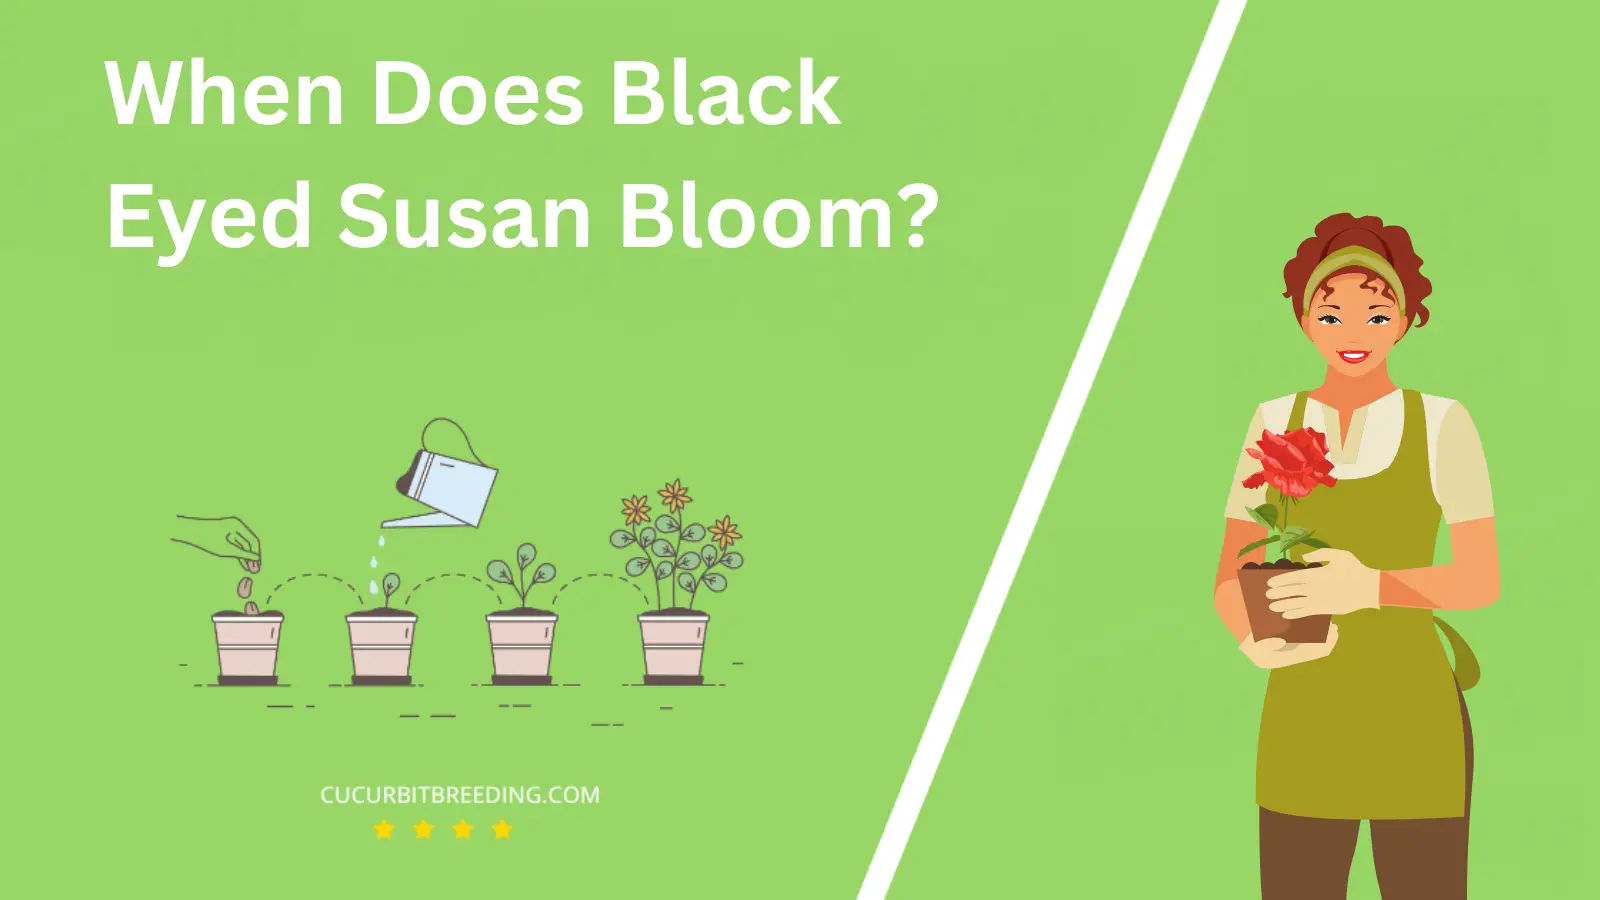 When Does Black Eyed Susan Bloom?